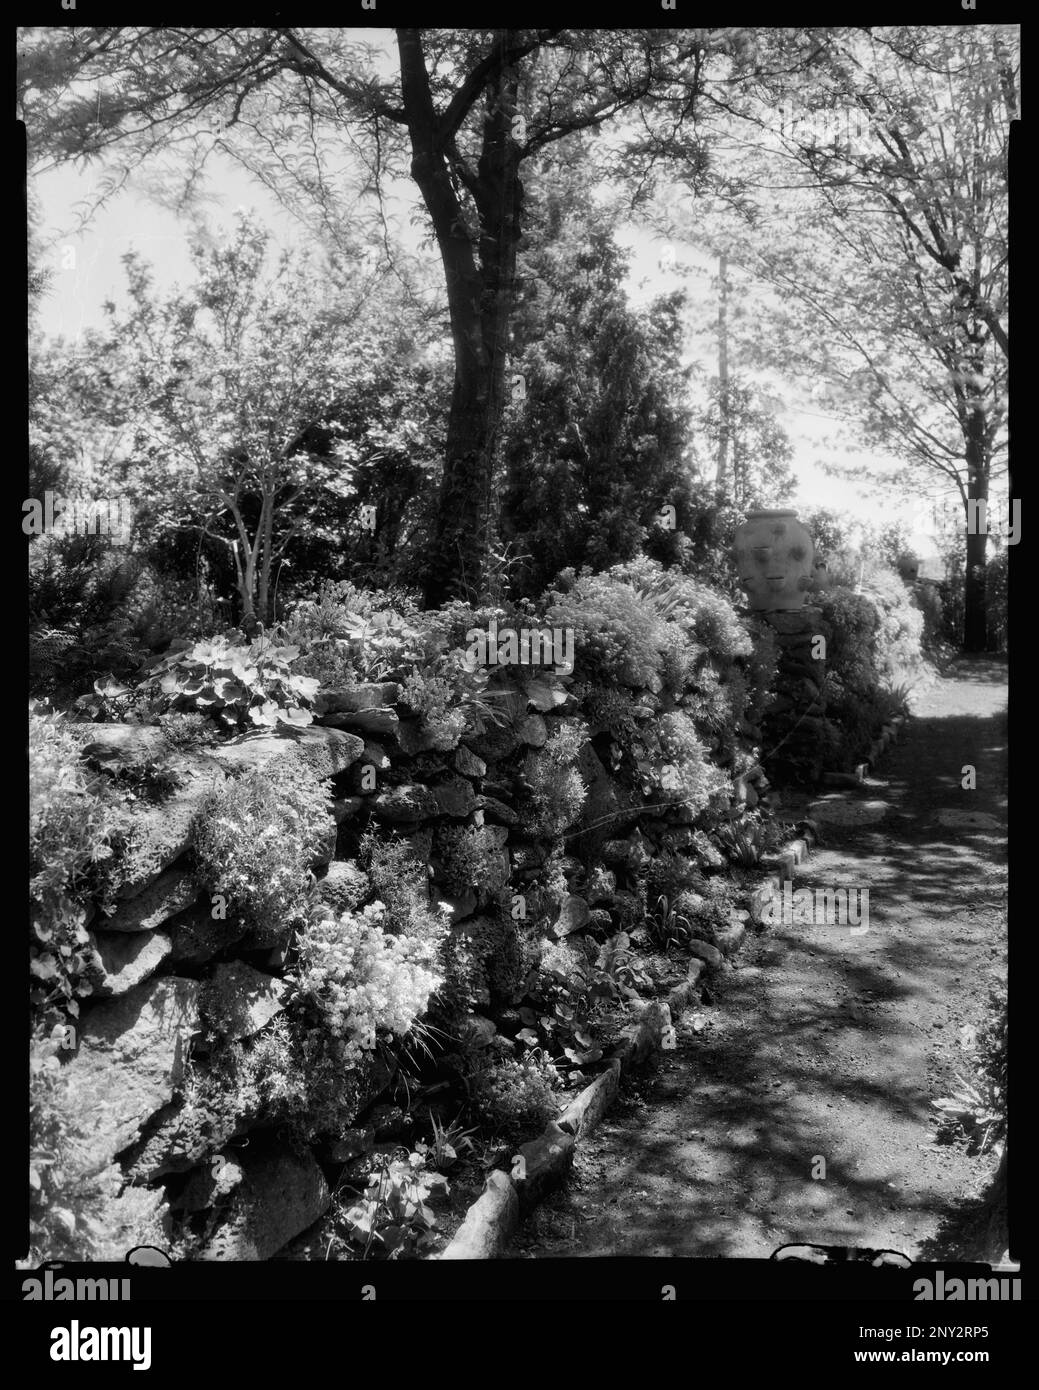 Rose Hill, Greenwood, Albemarle County, Virginia. Carnegie Survey of the Architecture of the South. United States  Virginia  Albemarle County  Greenwood, Stone walls, Gardens. Stock Photo